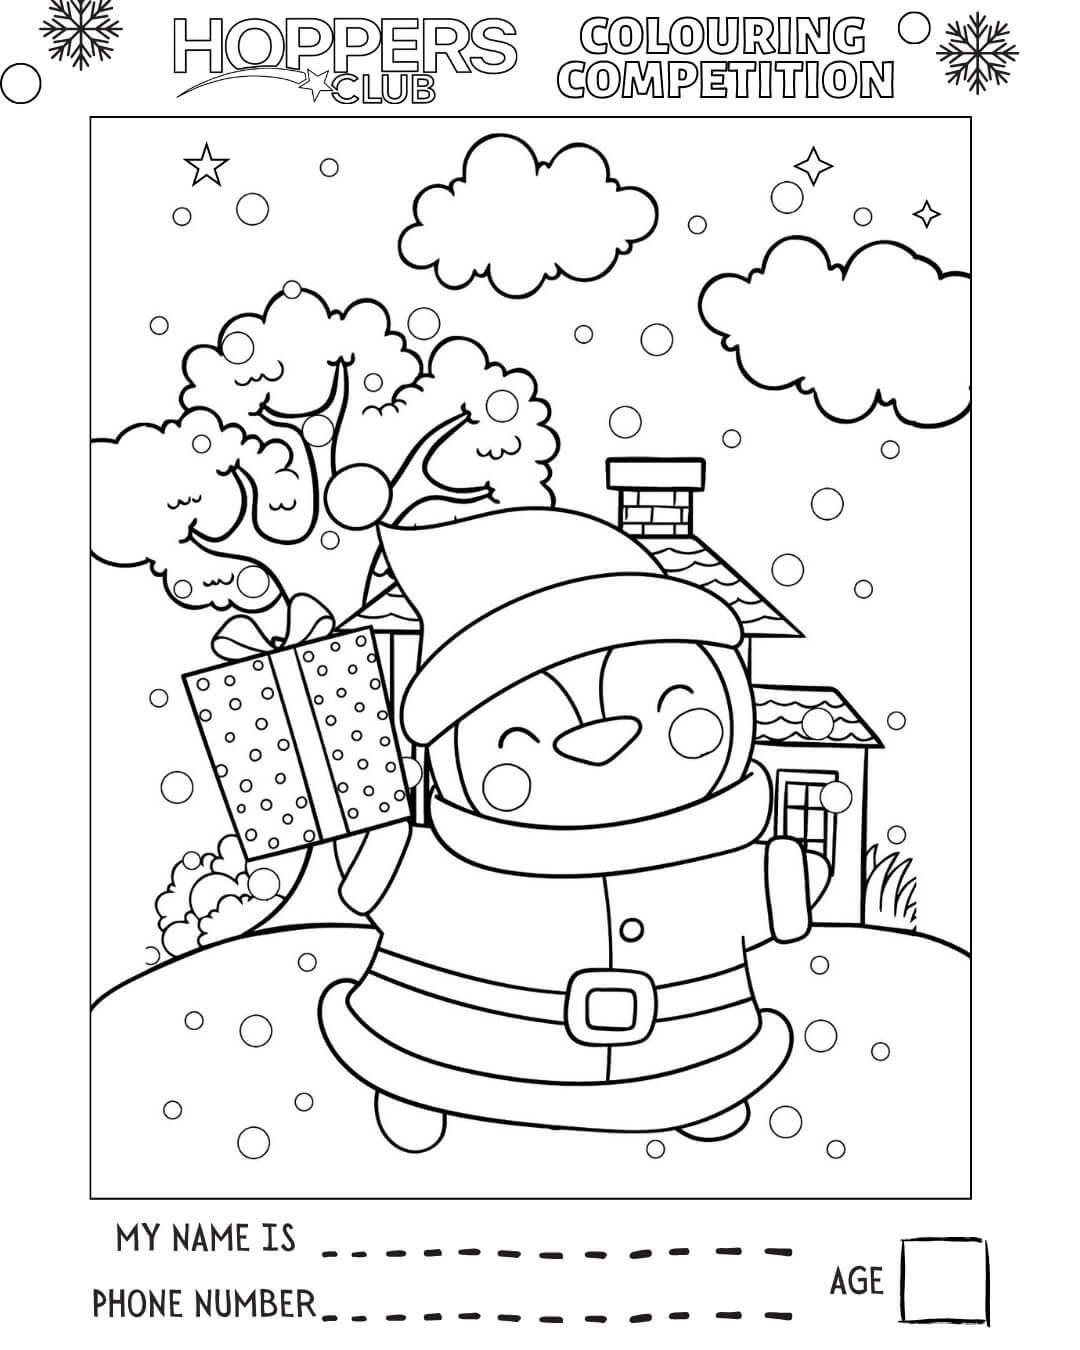 Download or come in to get your colouring page!